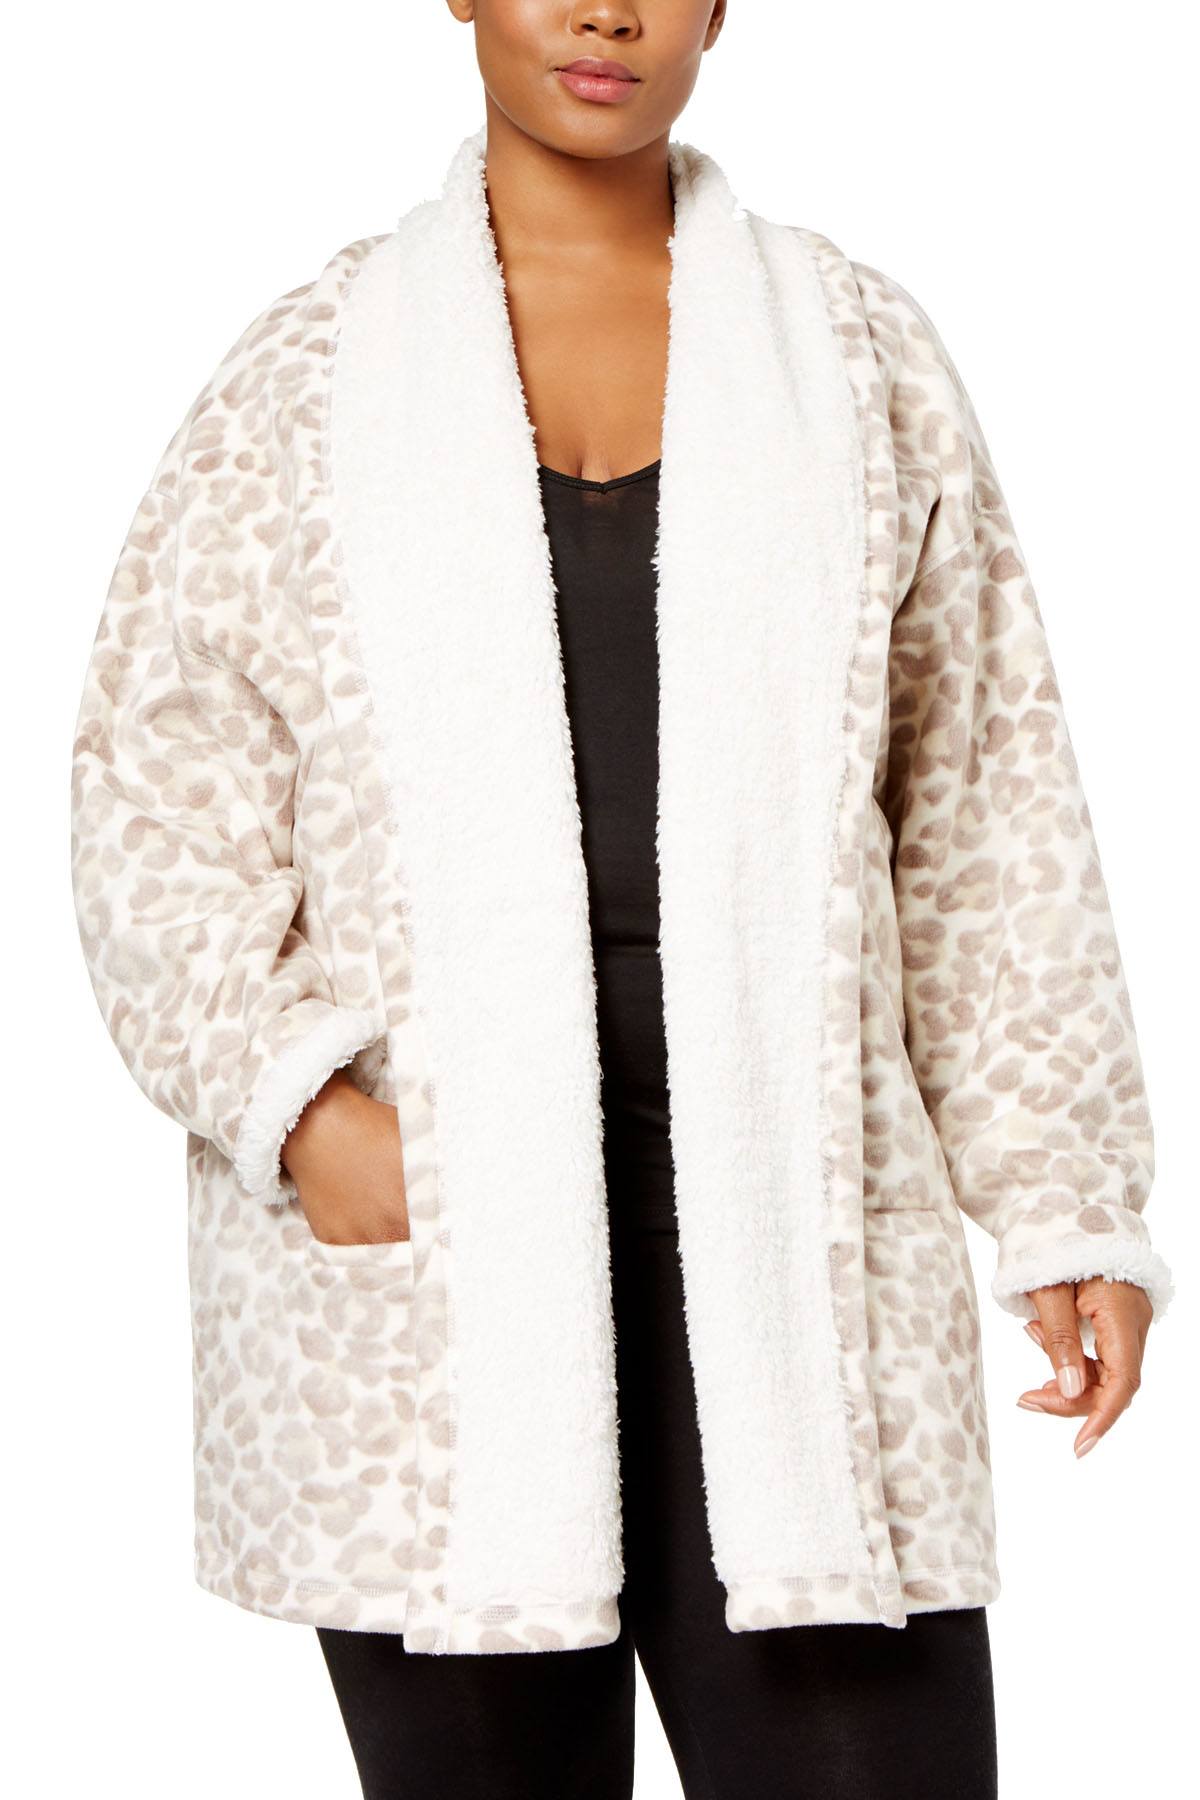 HUE Off-White/Beige Leopard Illusion Cozy Open-Front Robe